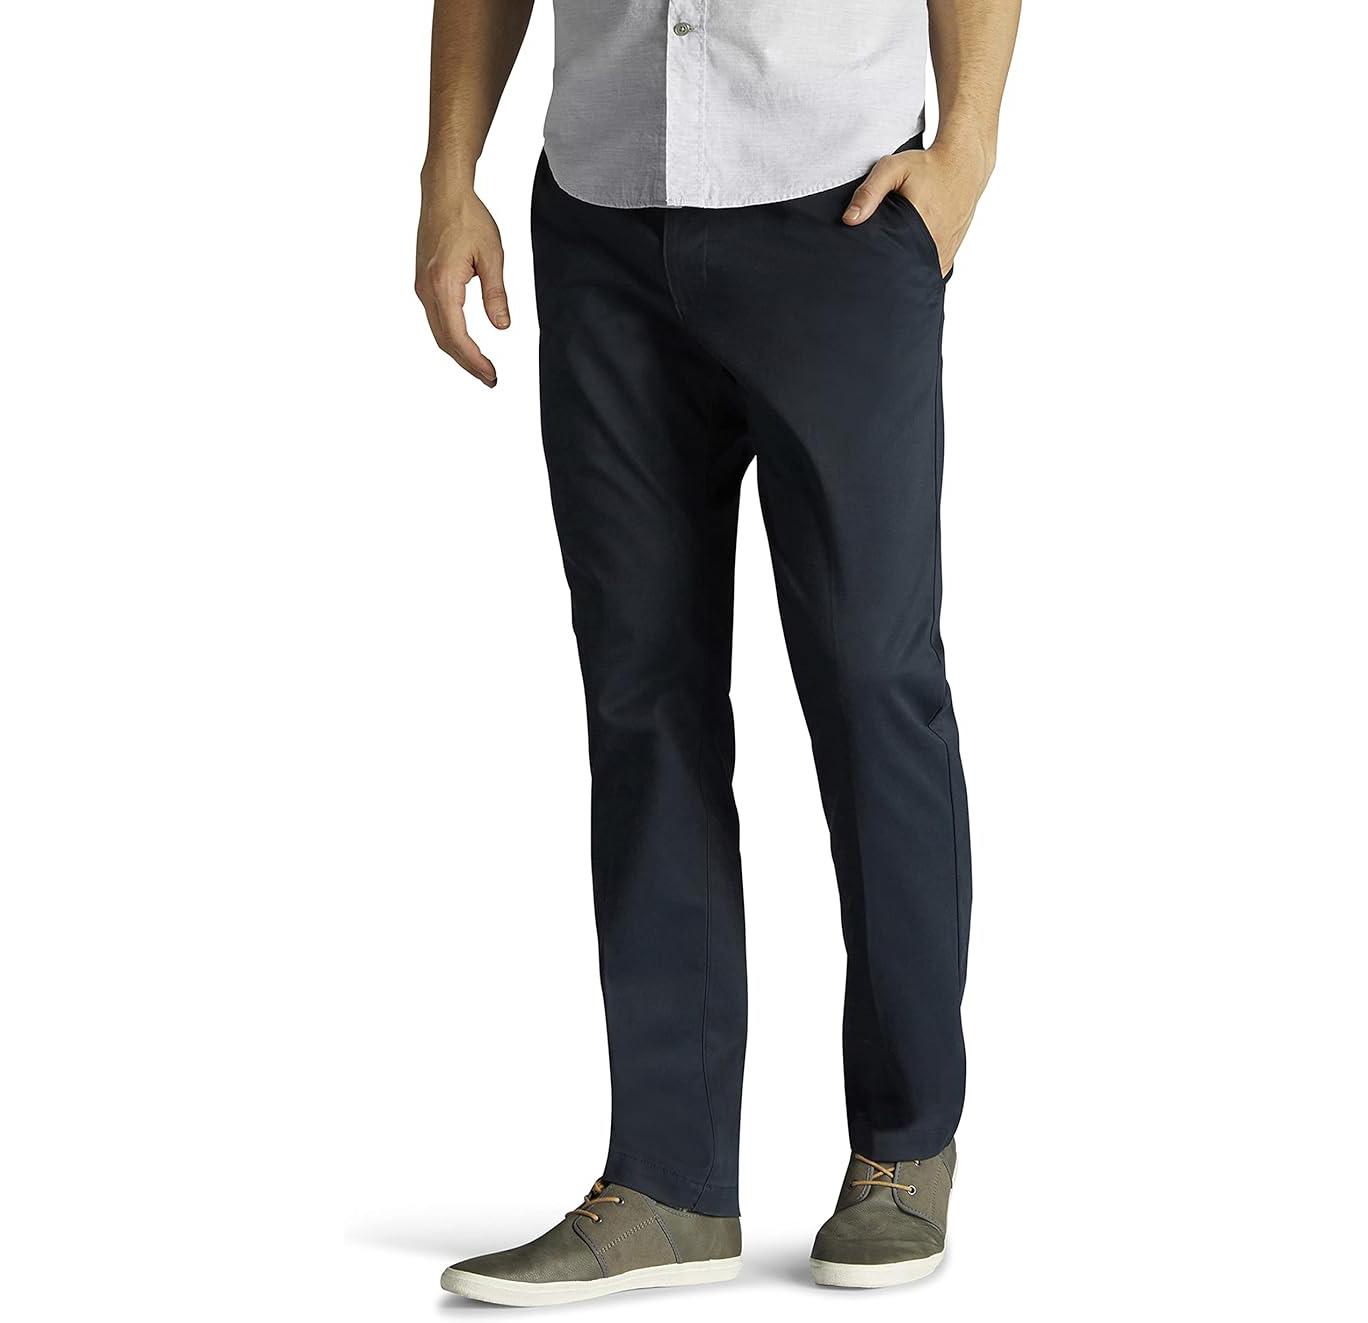 Lee Mens Extreme Motion Flat Front Slim Straight Pant for $17